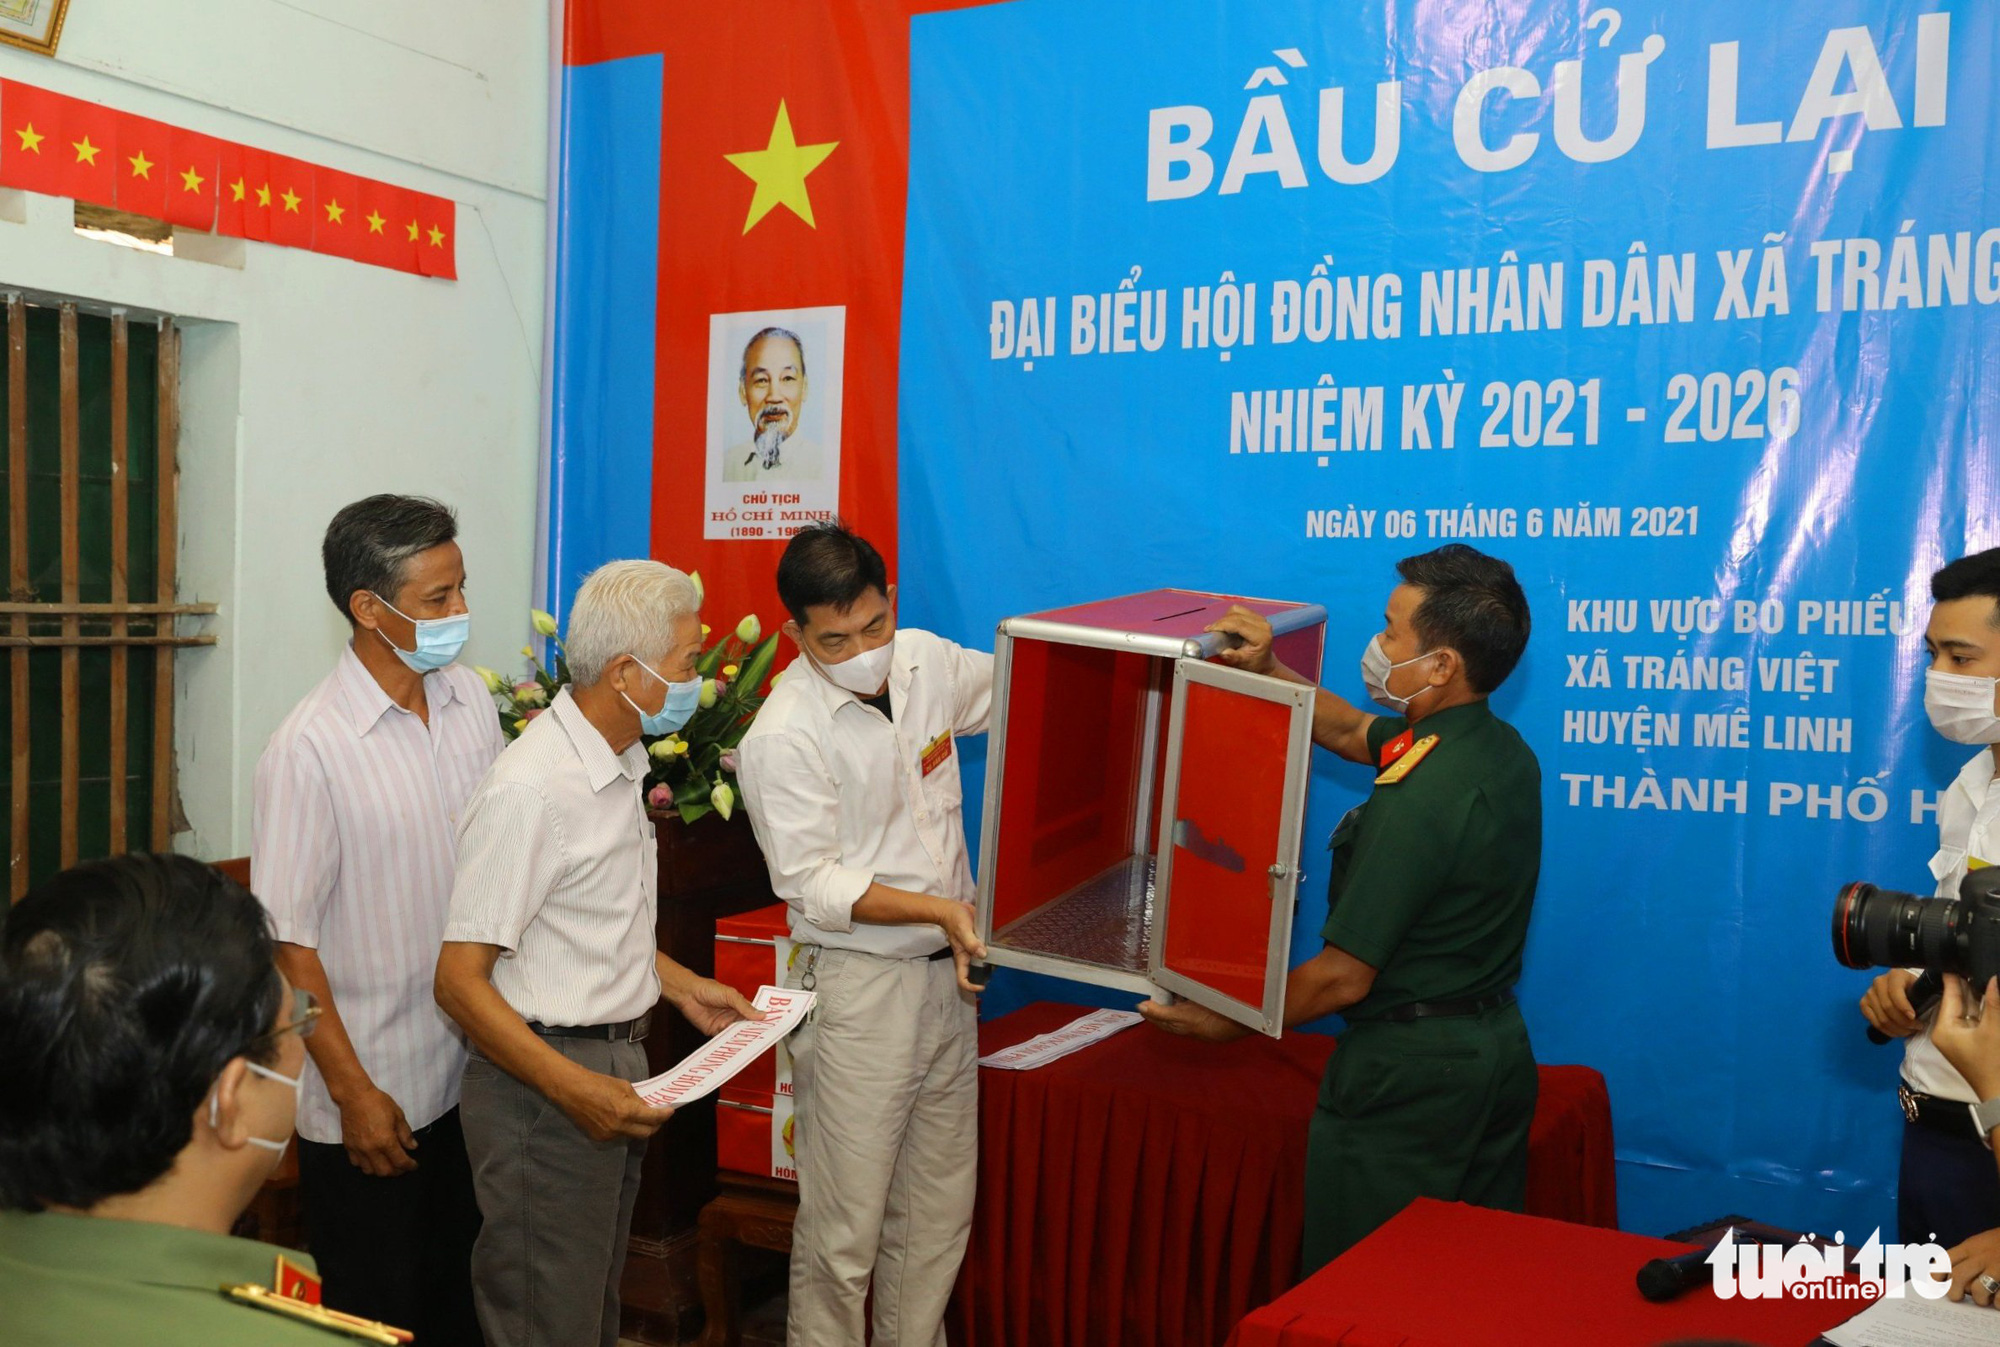 The election of members to the People’s Council in Trang Viet Commune, Me Linh District, Hanoi, is re-organized on June 6, 2021. Photo: Ha Quan / Tuoi Tre